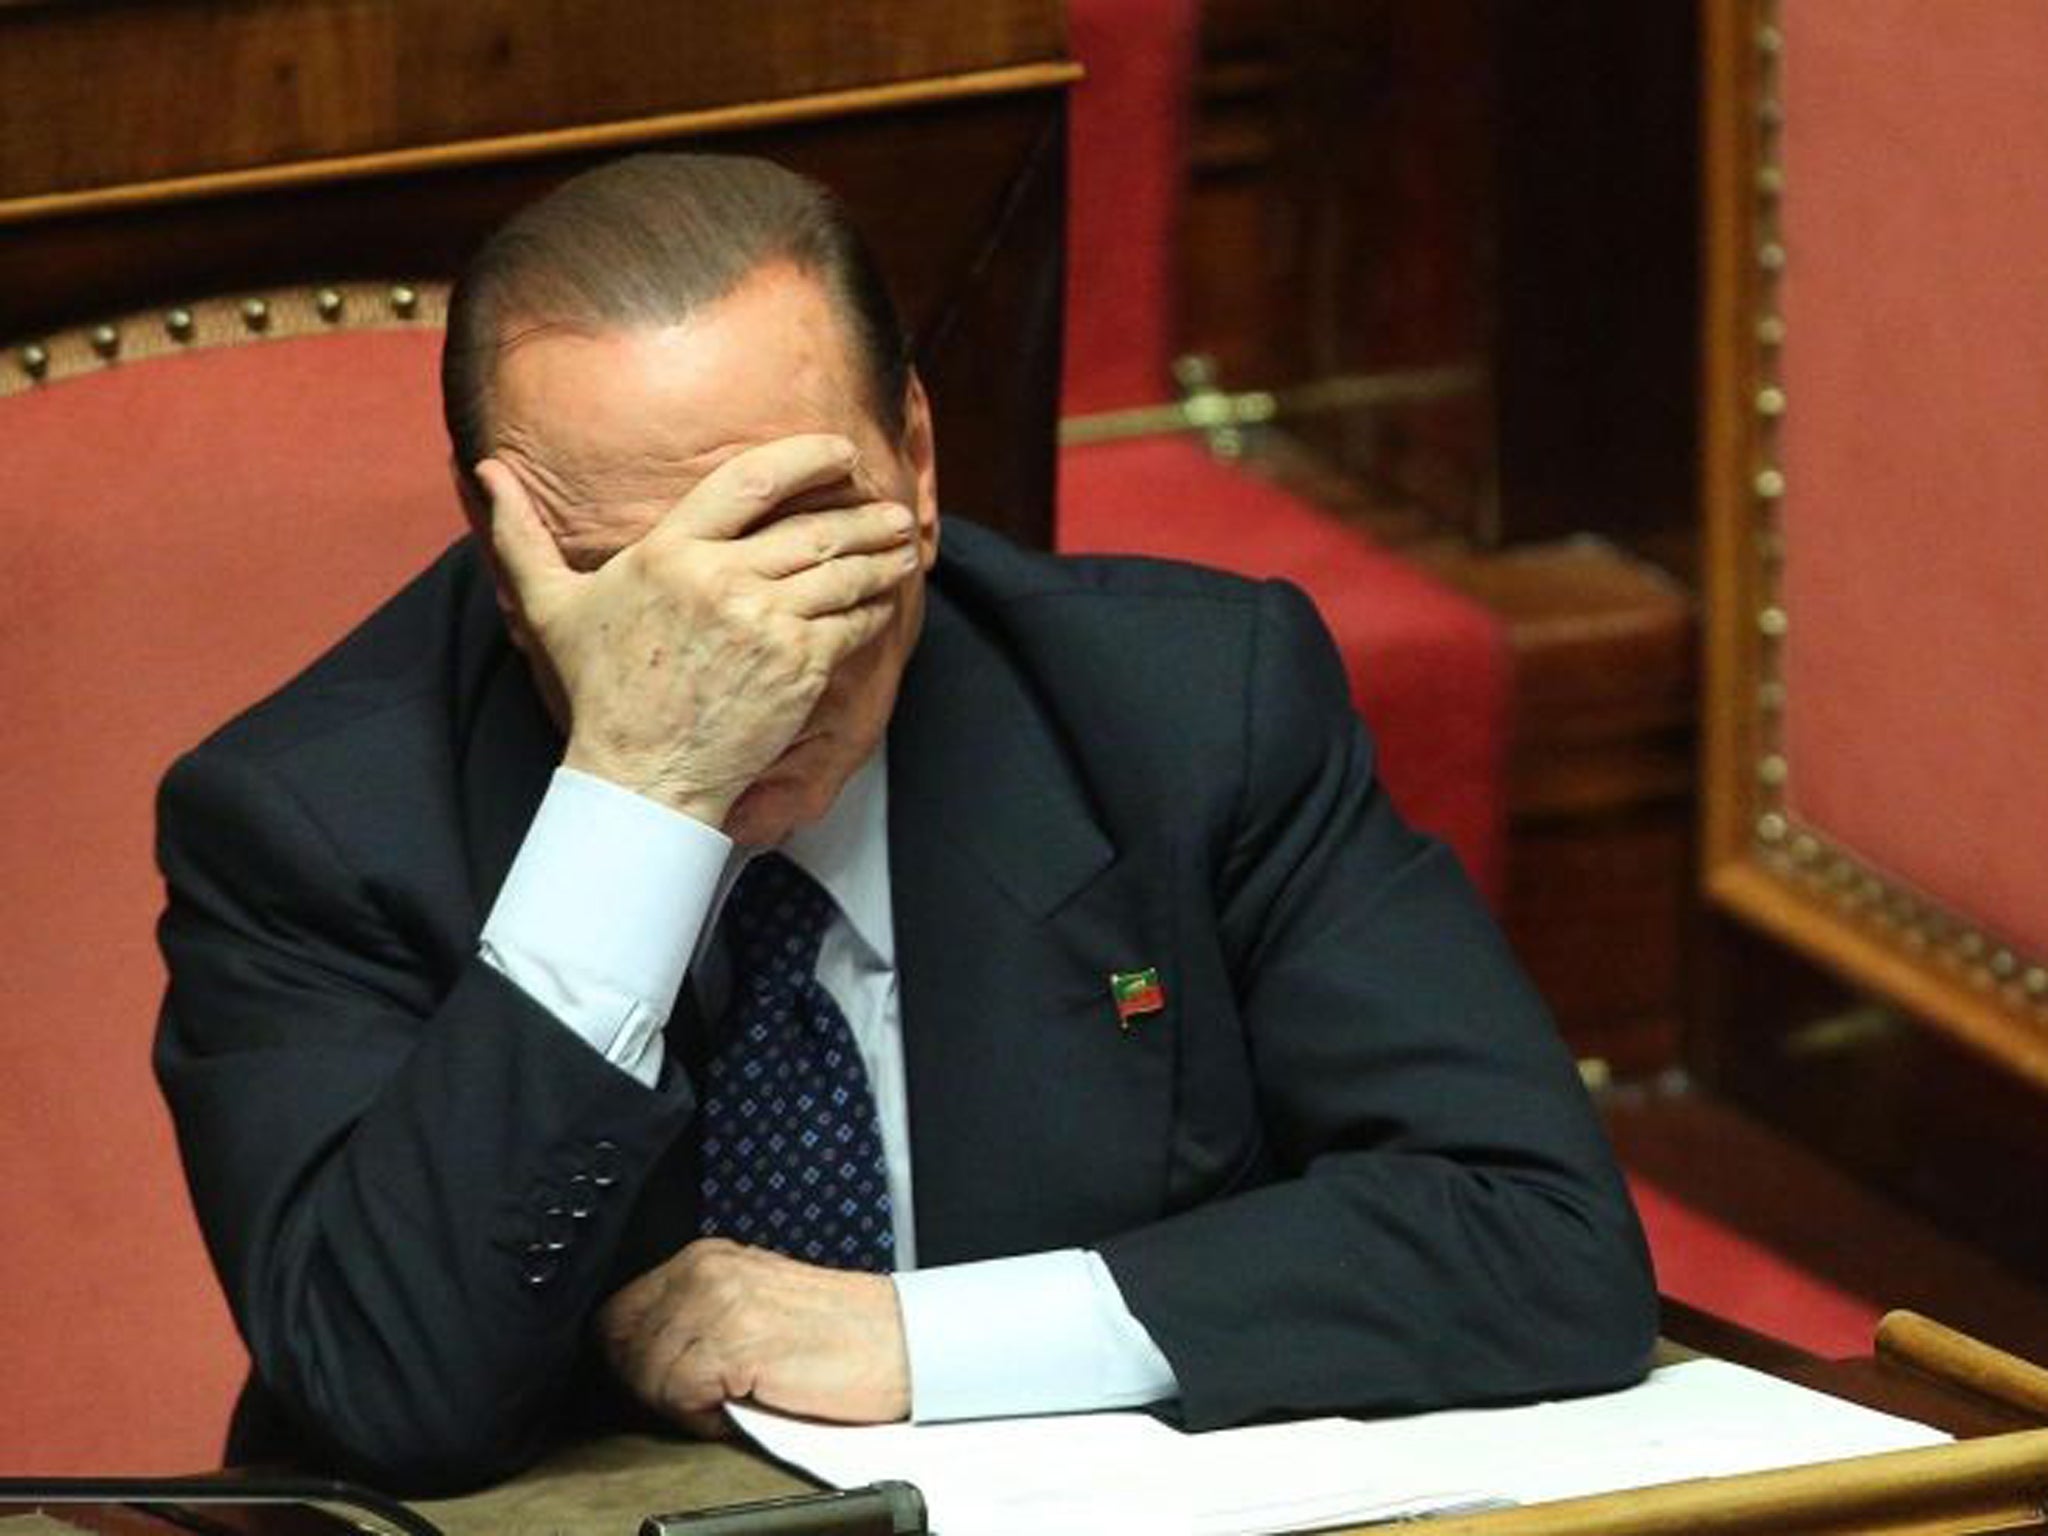 Former Italian Prime Minister Silvio Berlusconi of the People of Freedom (PDL) party reacts at the Senate, Rome